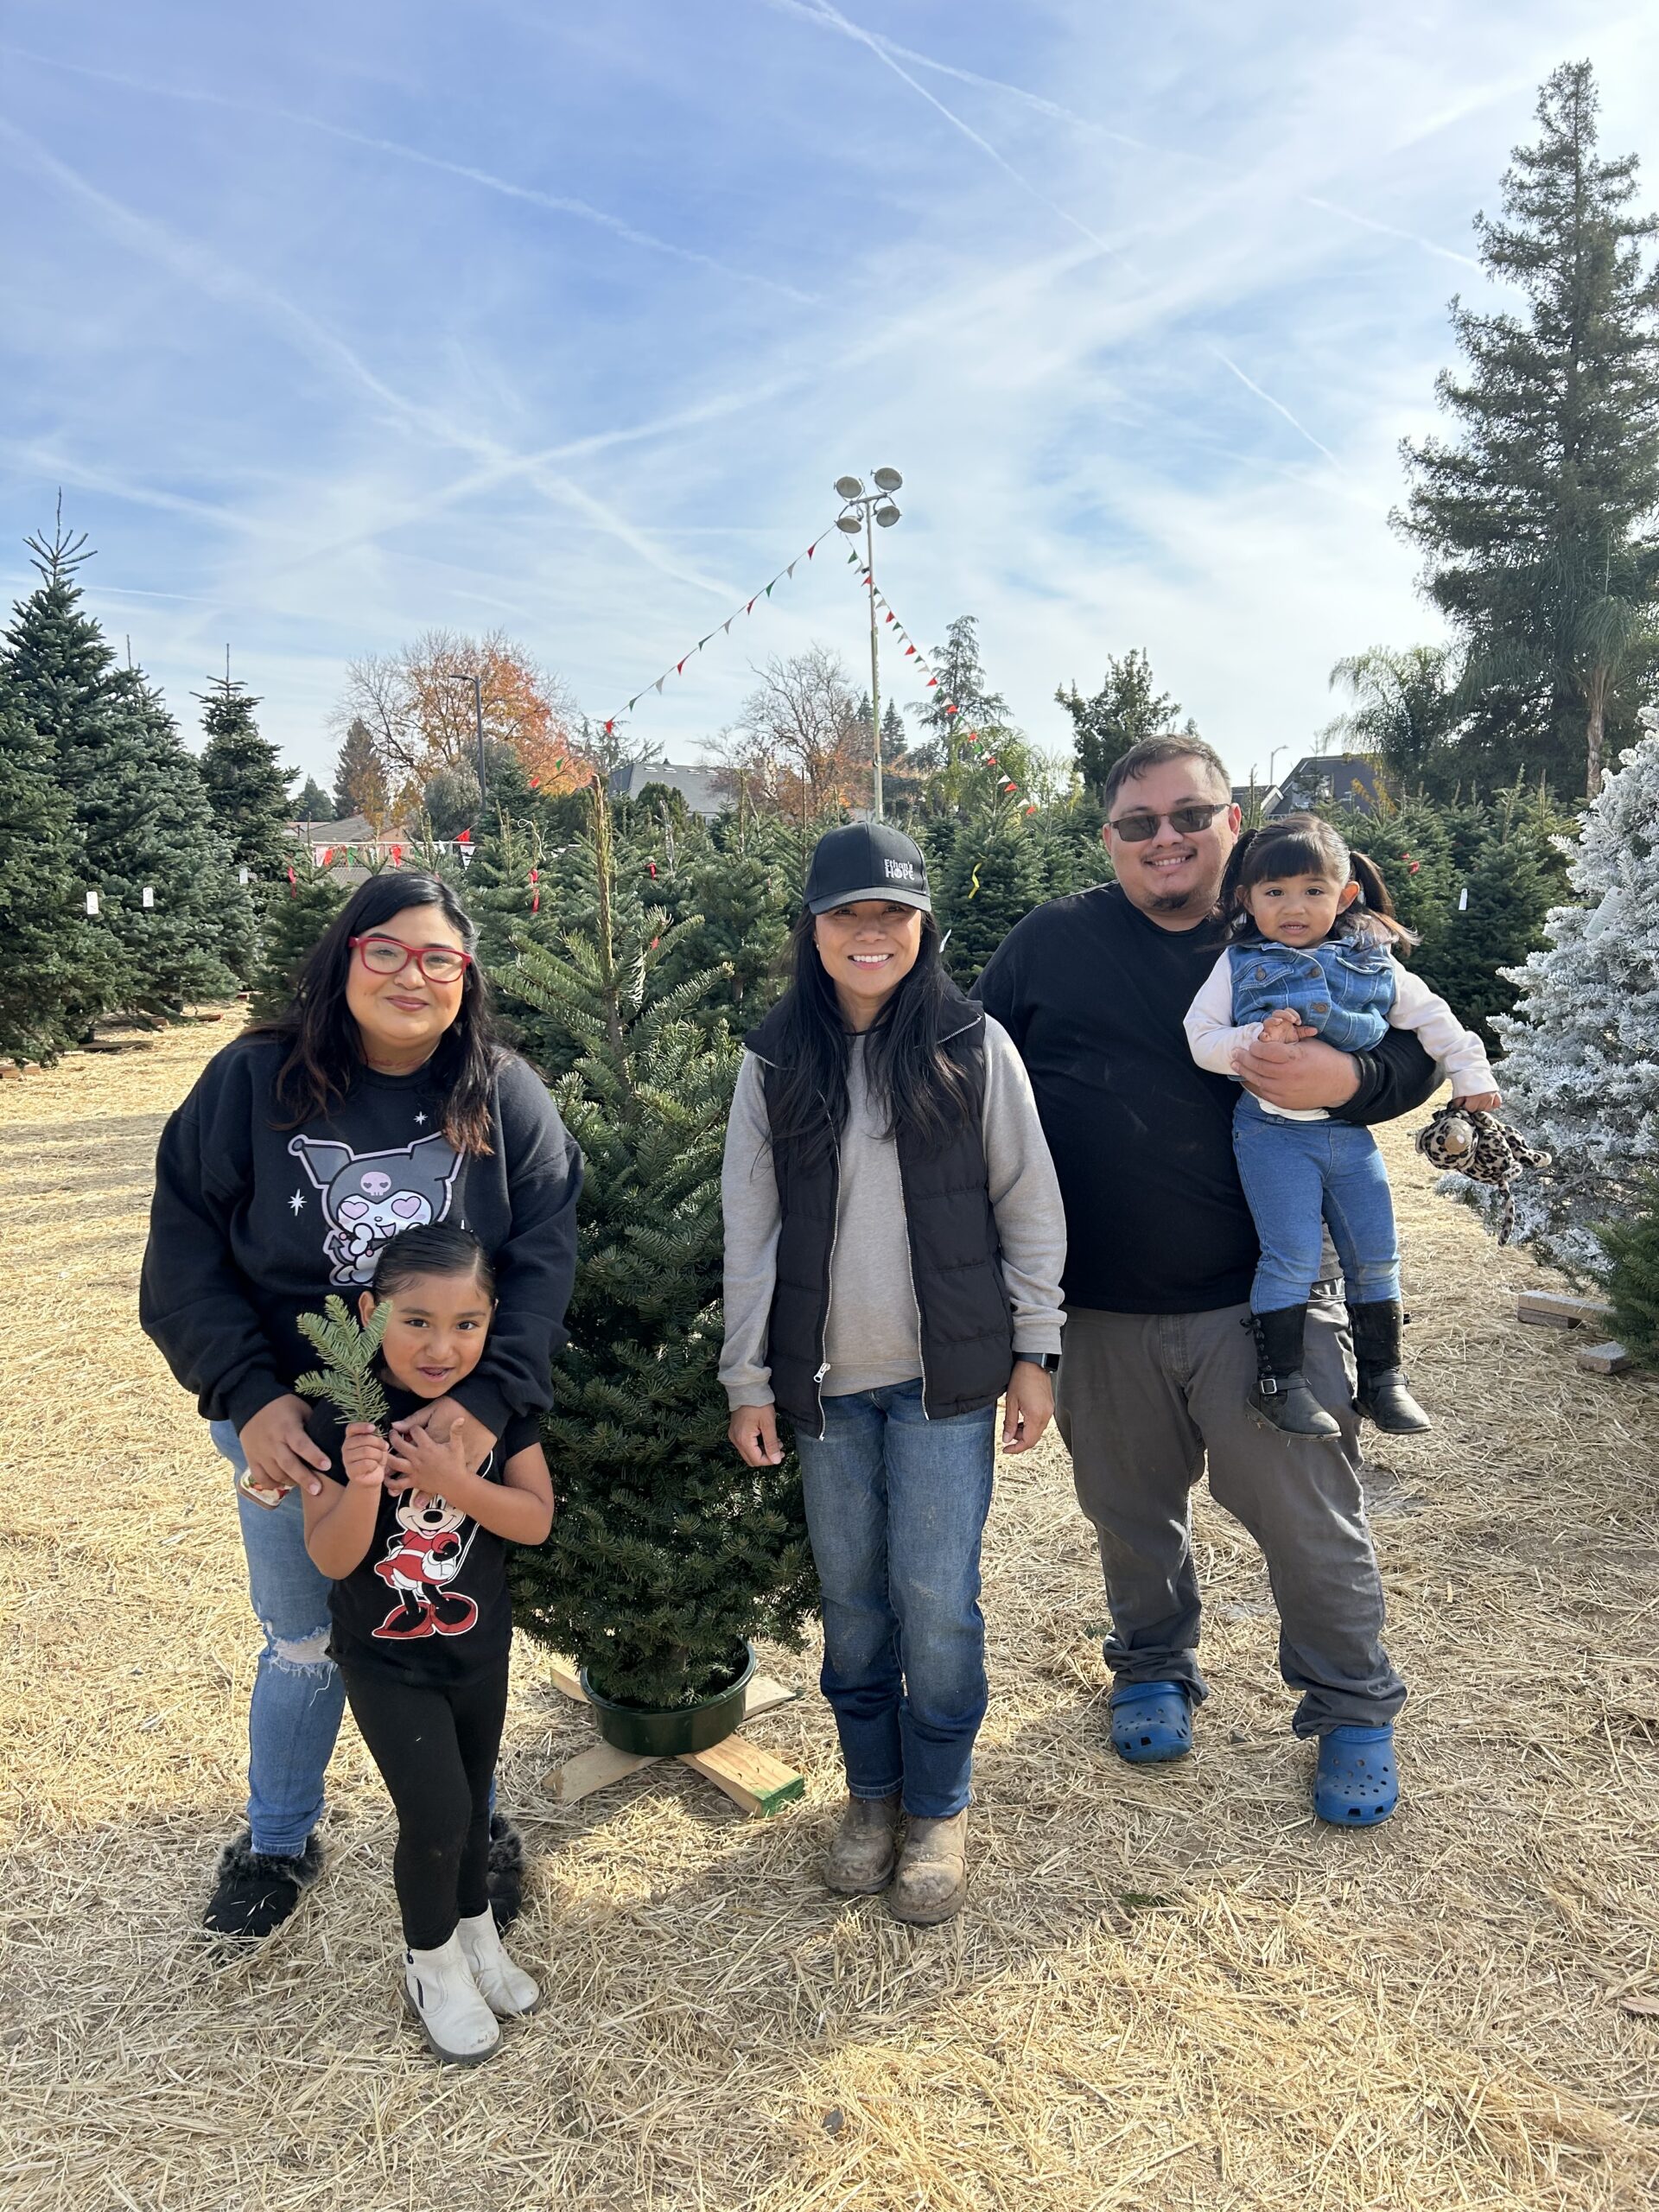 A FAMILY OF 5 SUPPORTED BY THE ETHANS HOPE FOUNDATION DURING CHRISTMAS